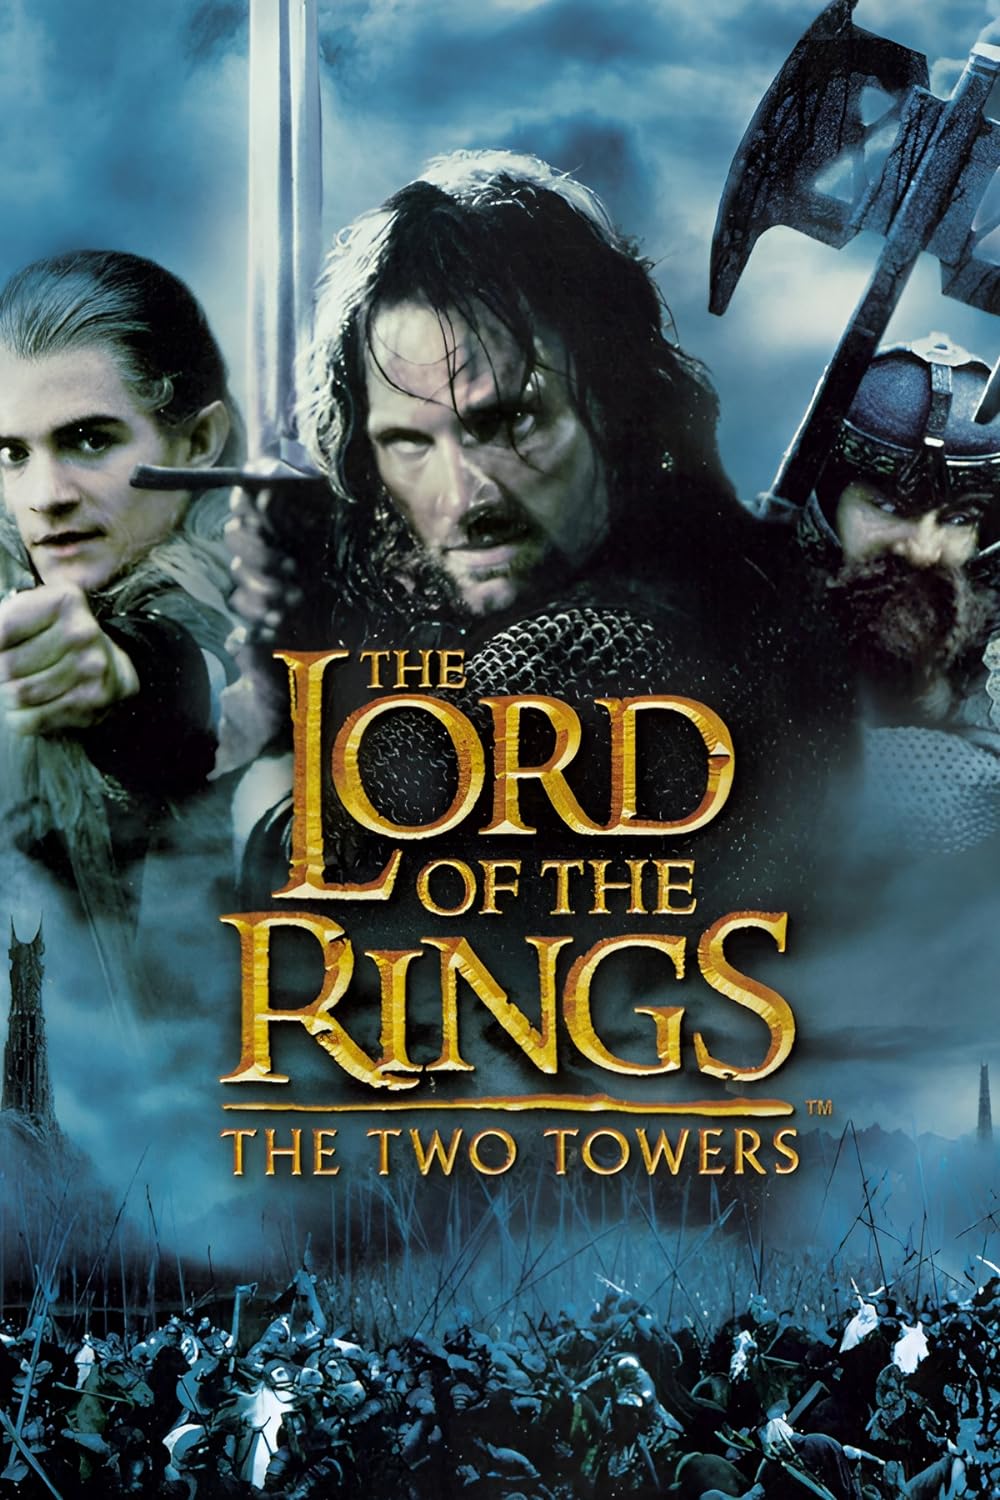 The Lord of the Rings- The Two Towers Extended 2002 3D Conversion 1080p MVC Atmos 7 1 Multi Subs (40mbs) doogle